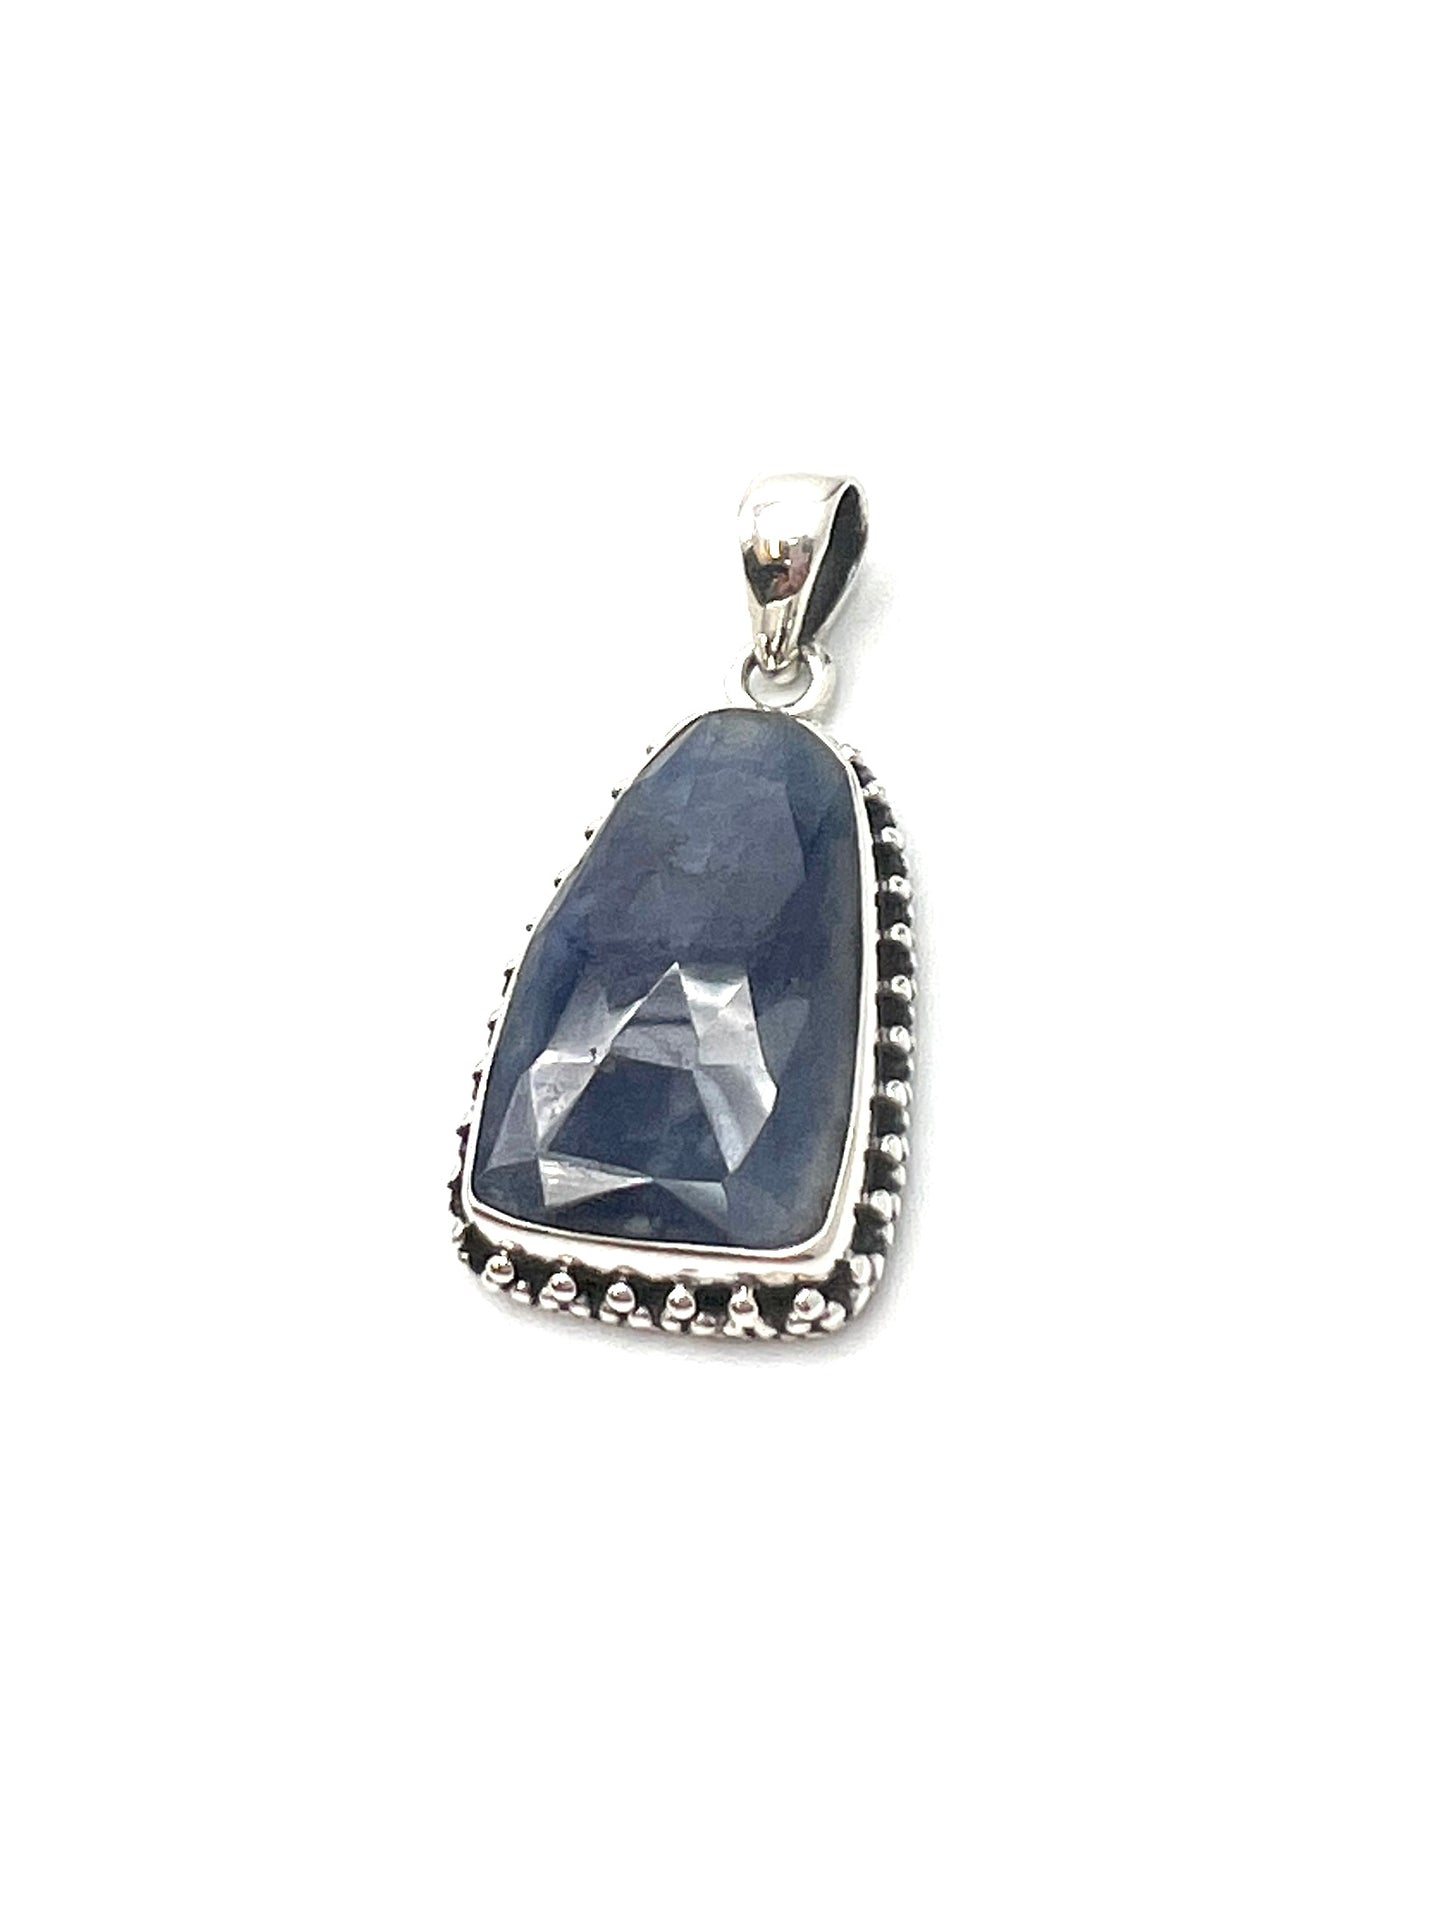 Faceted Sapphire Beaded Pendants